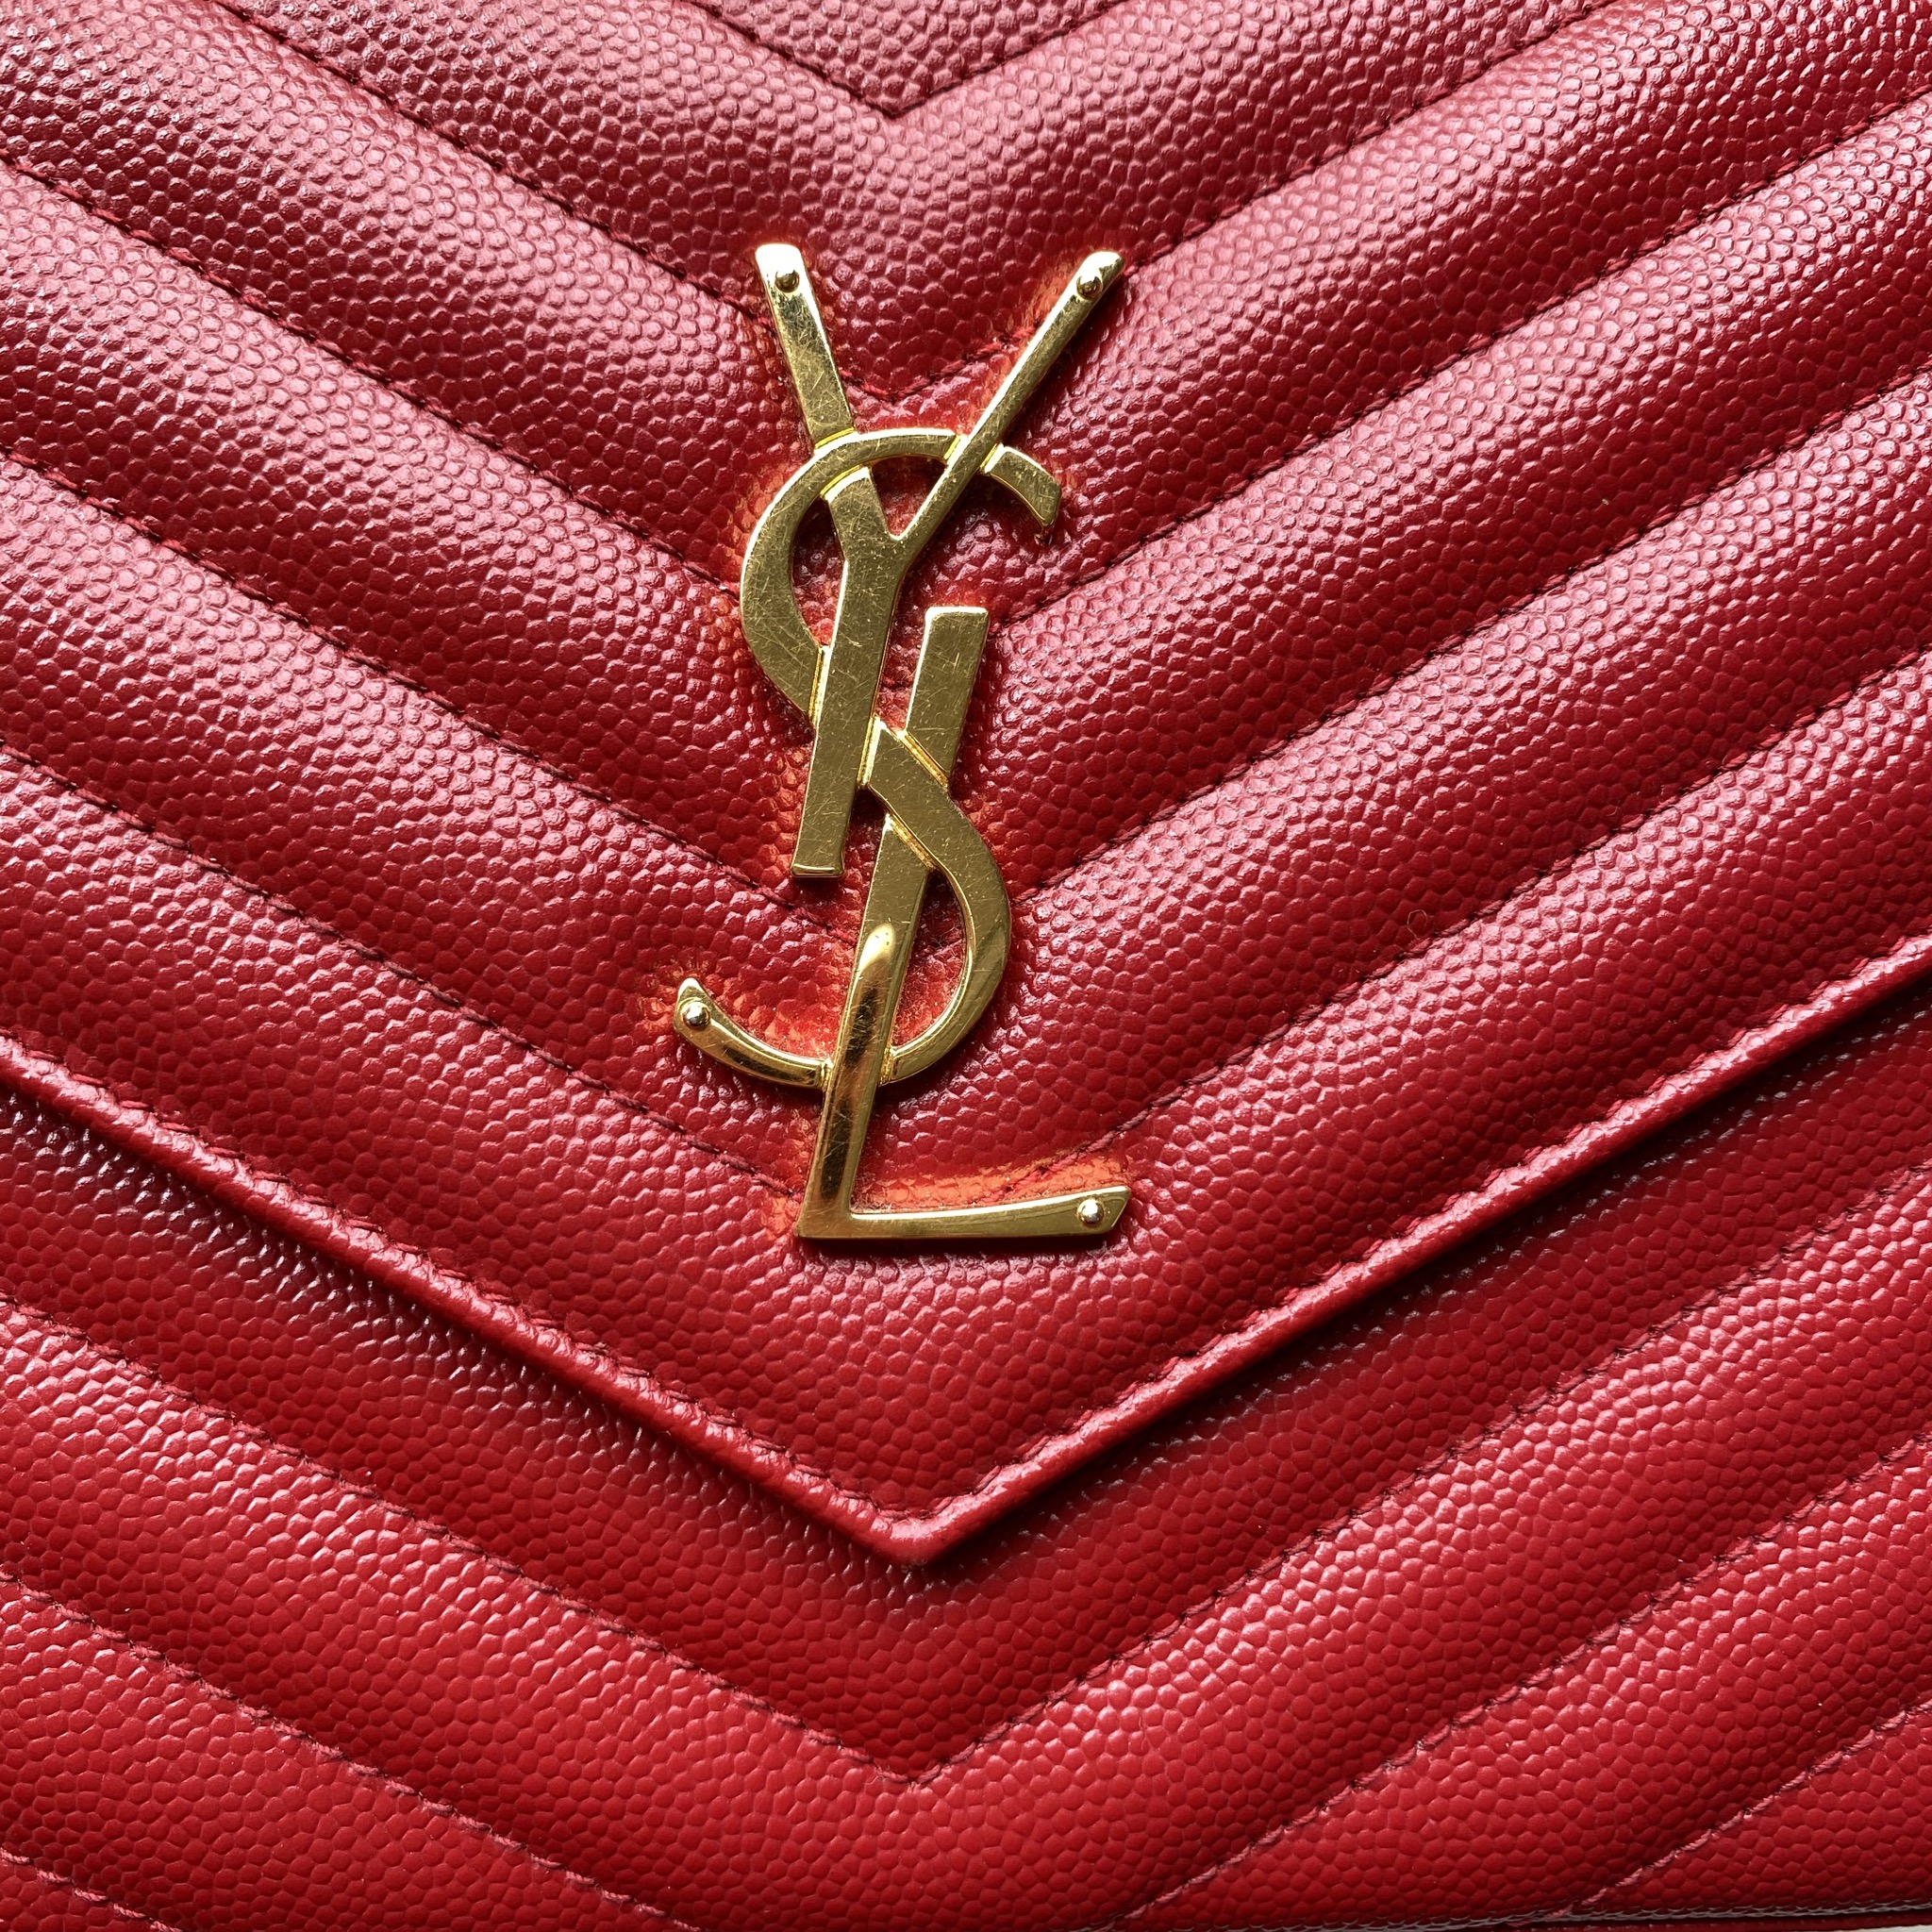 authentic ysl woc serial number